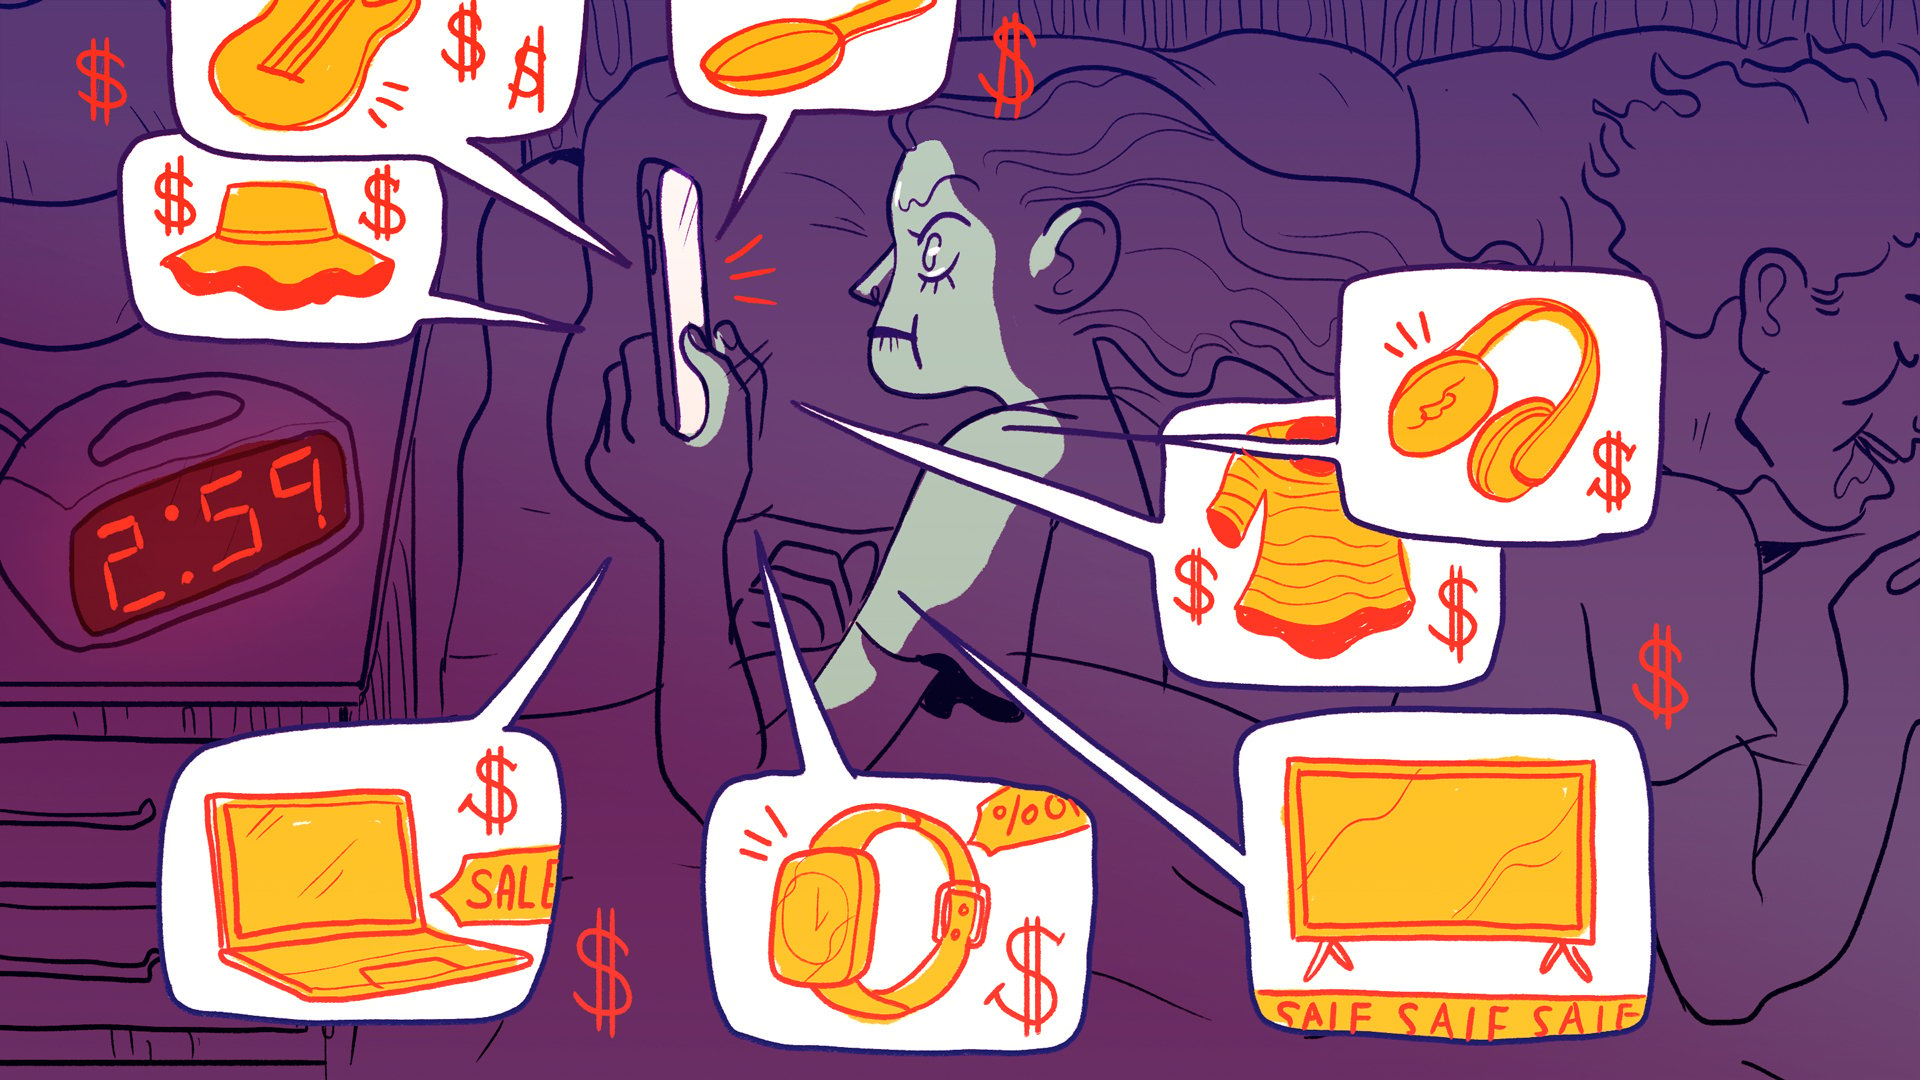 illustrated woman bombarded by deals on phone